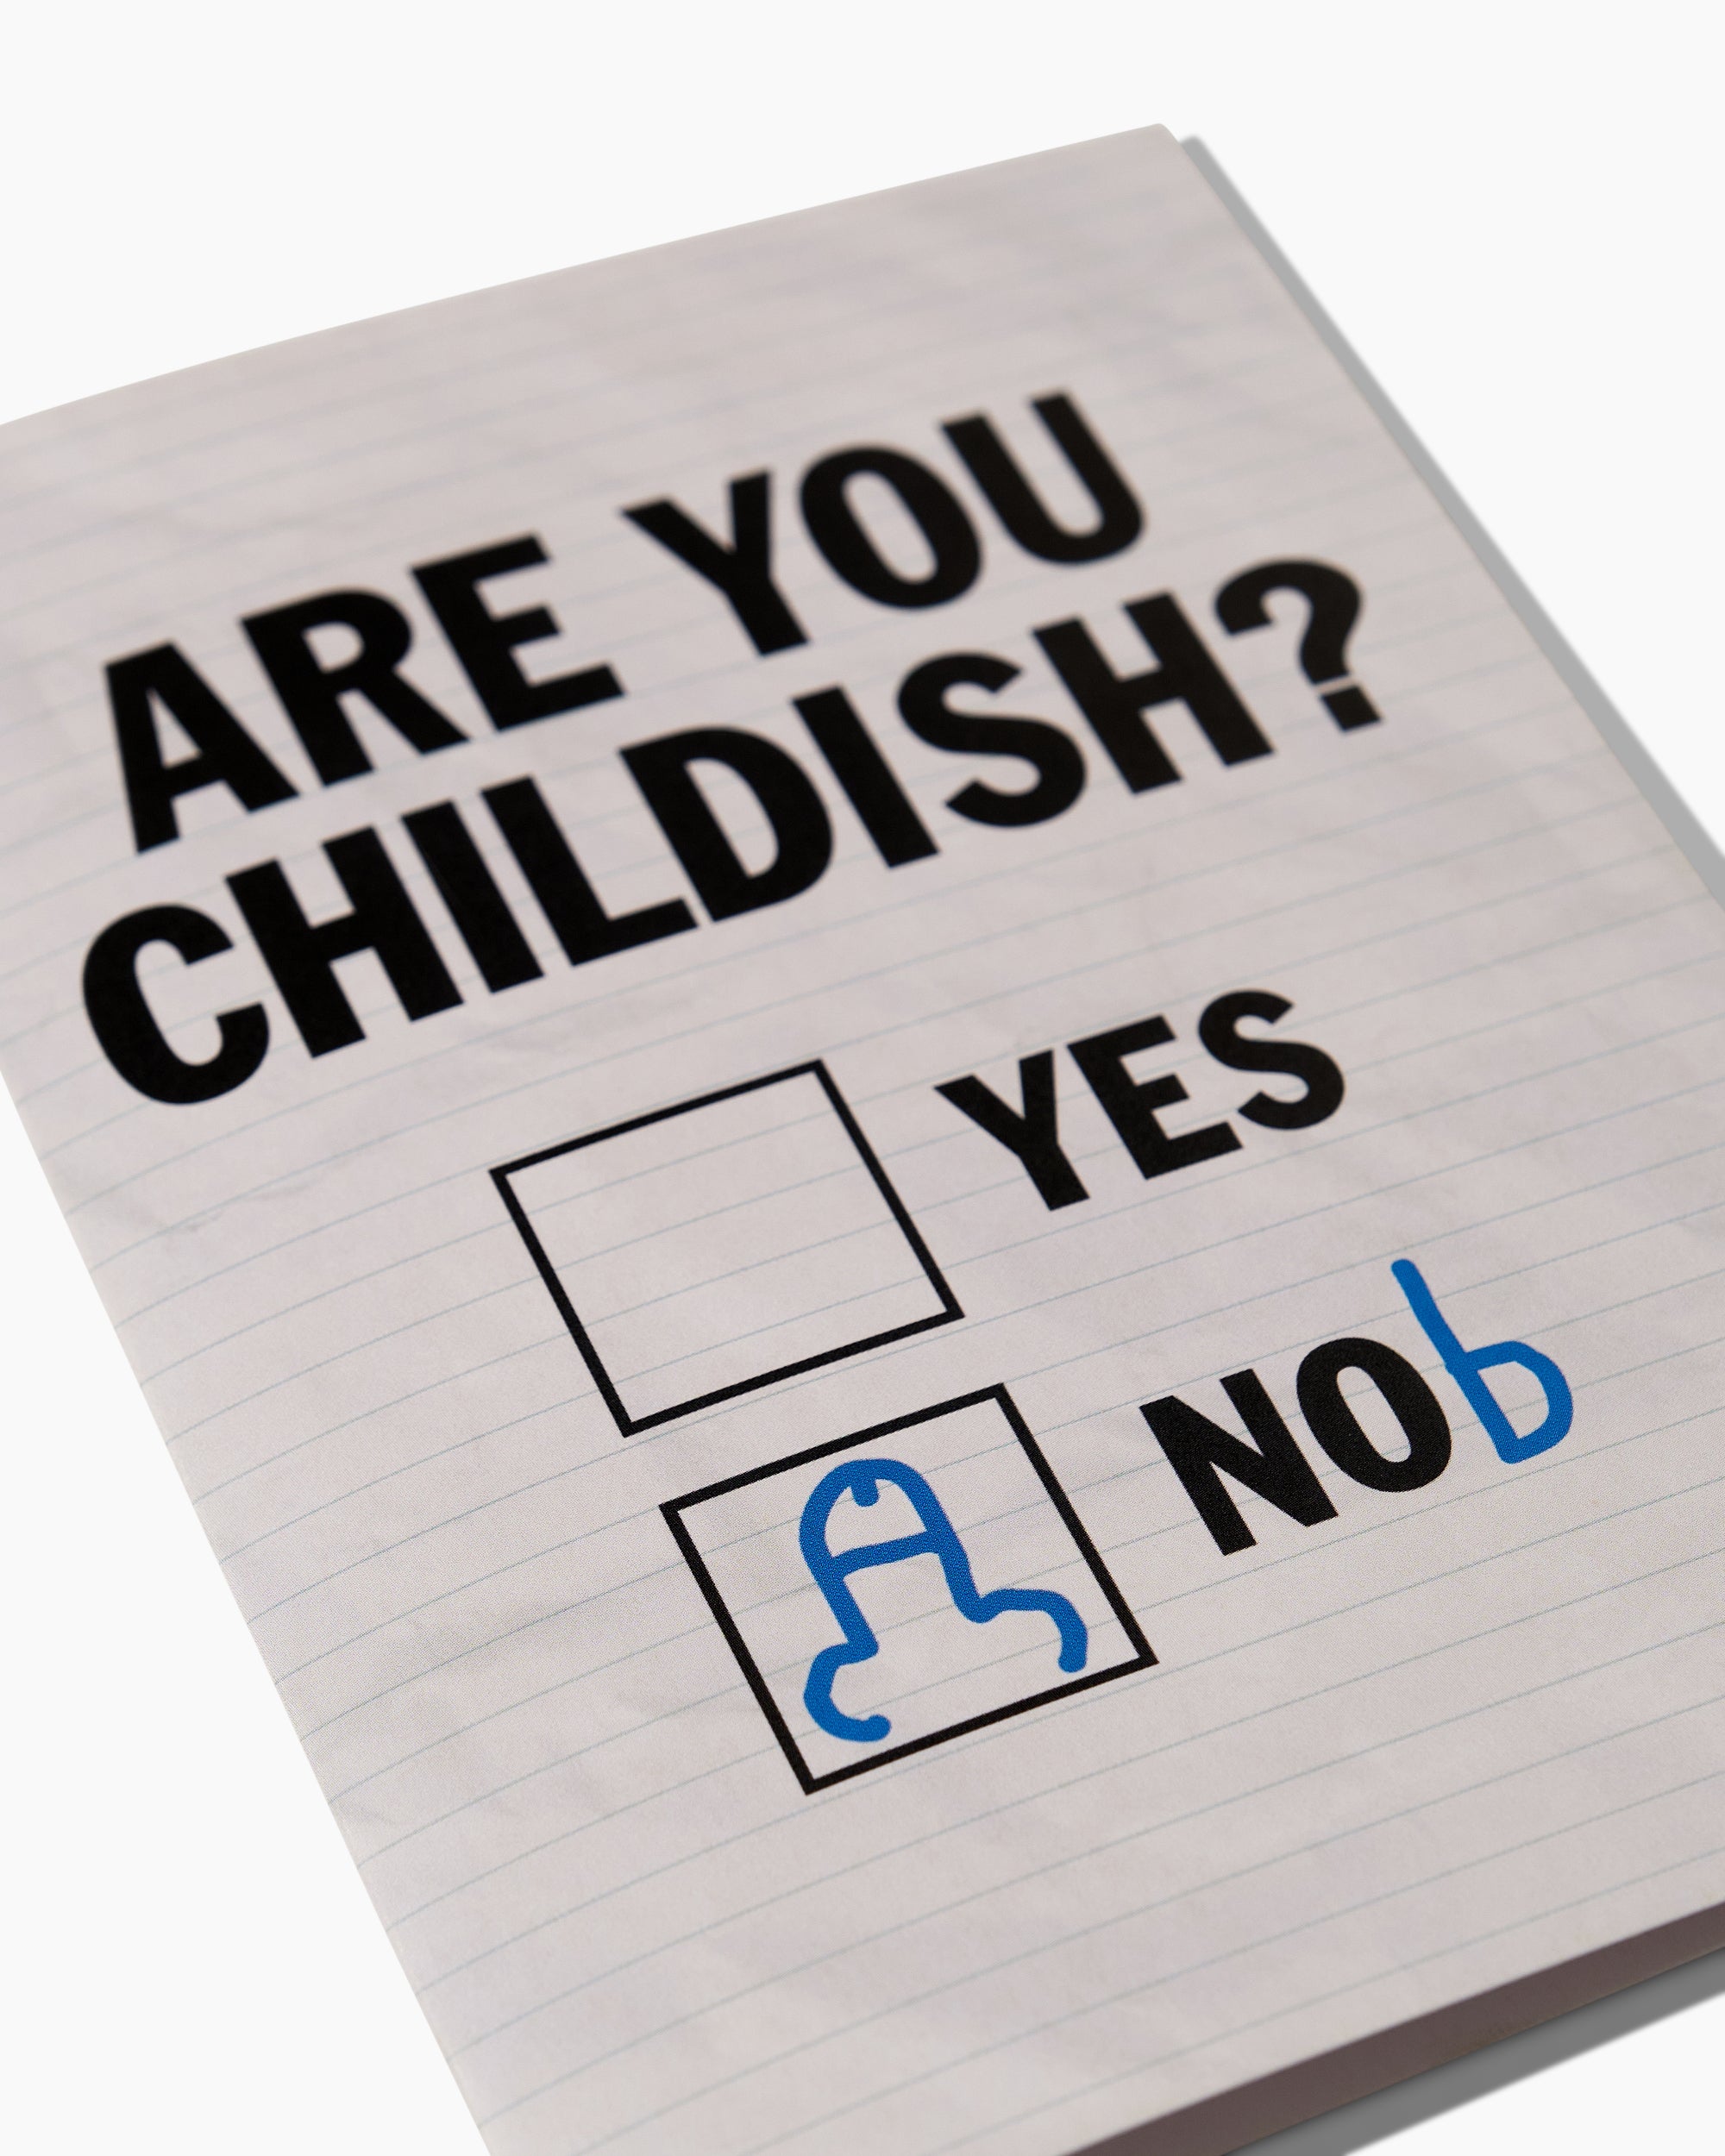 Are You Childish Greeting Card Australia Online